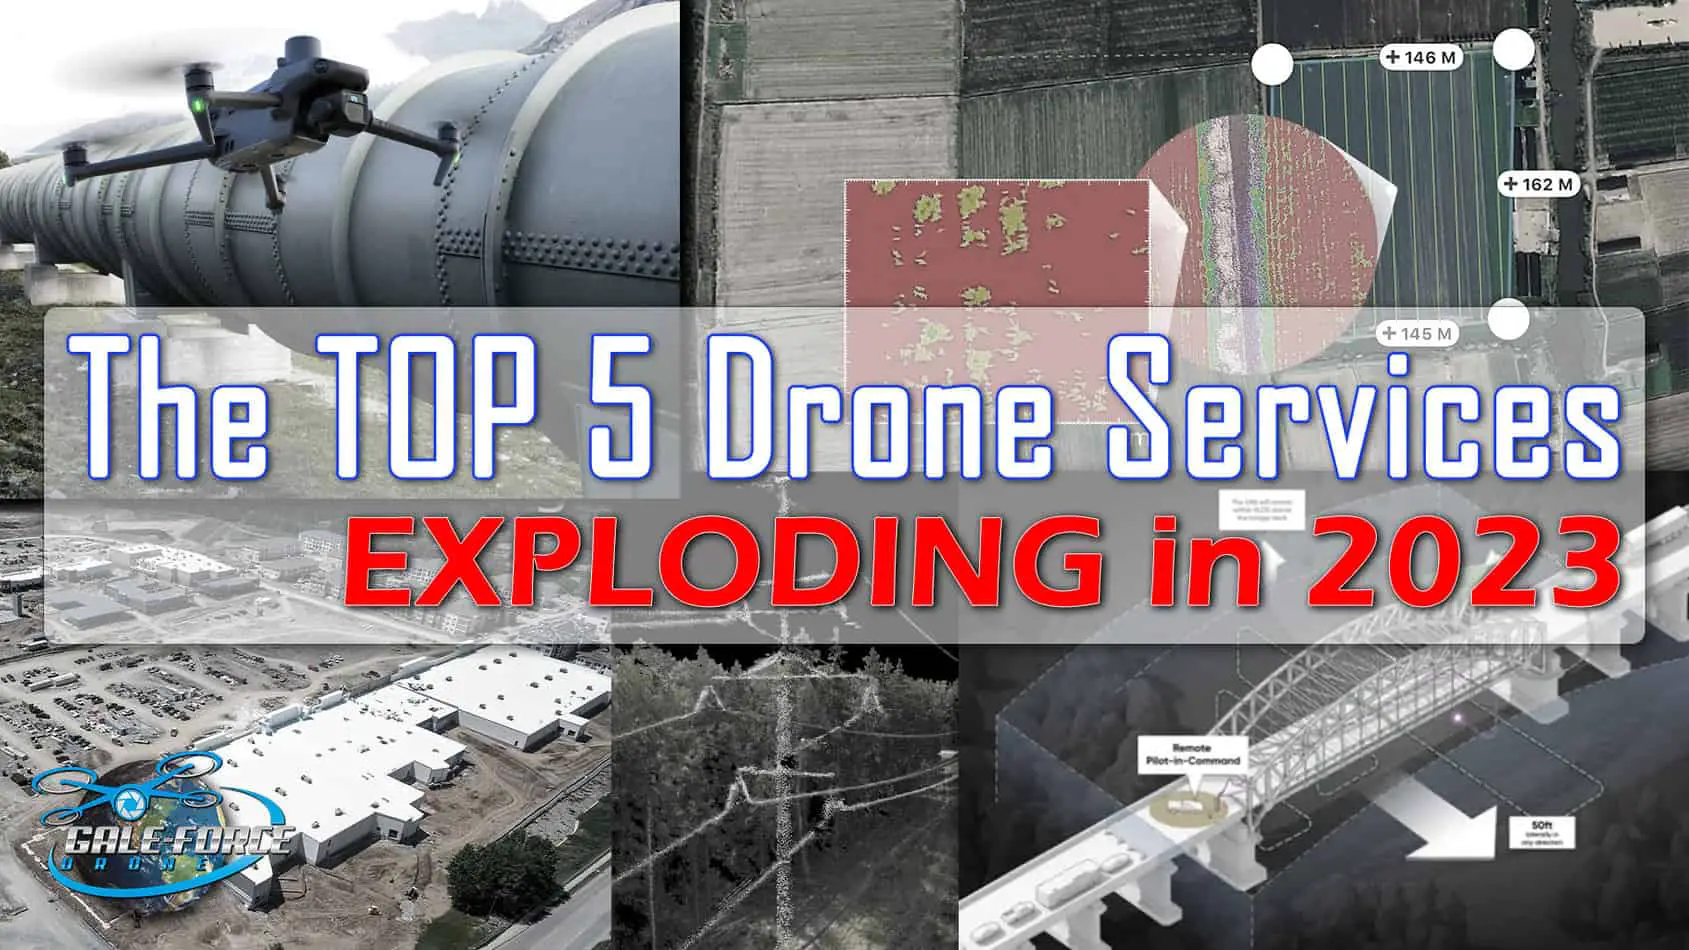 The 5 Drone Services that are EXPLODING in 2023